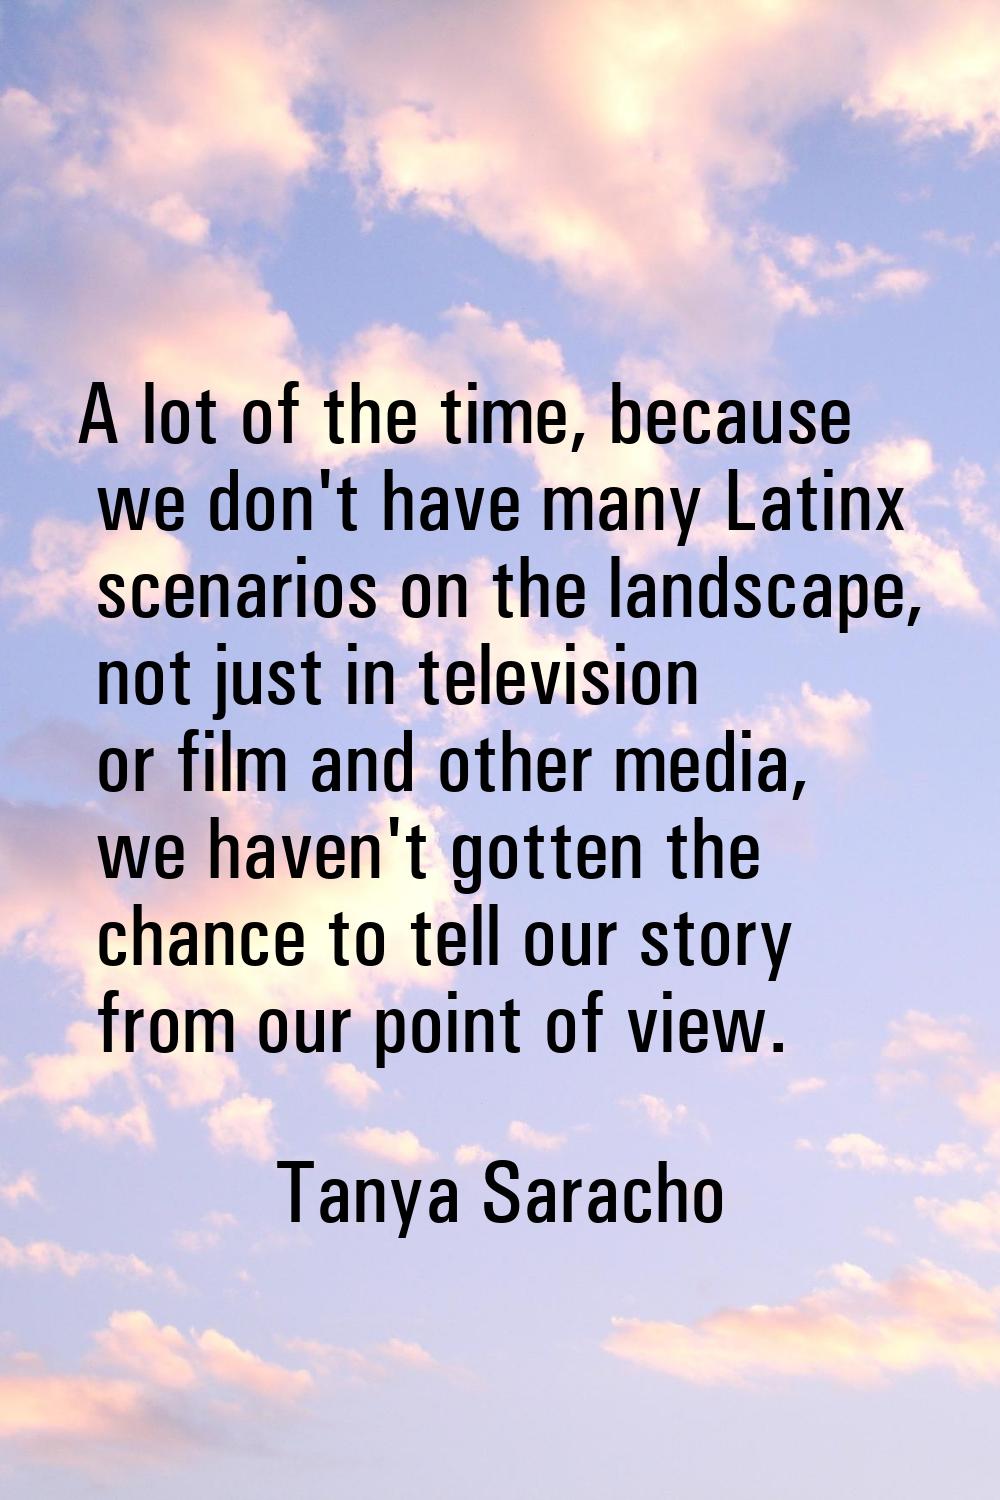 A lot of the time, because we don't have many Latinx scenarios on the landscape, not just in televi